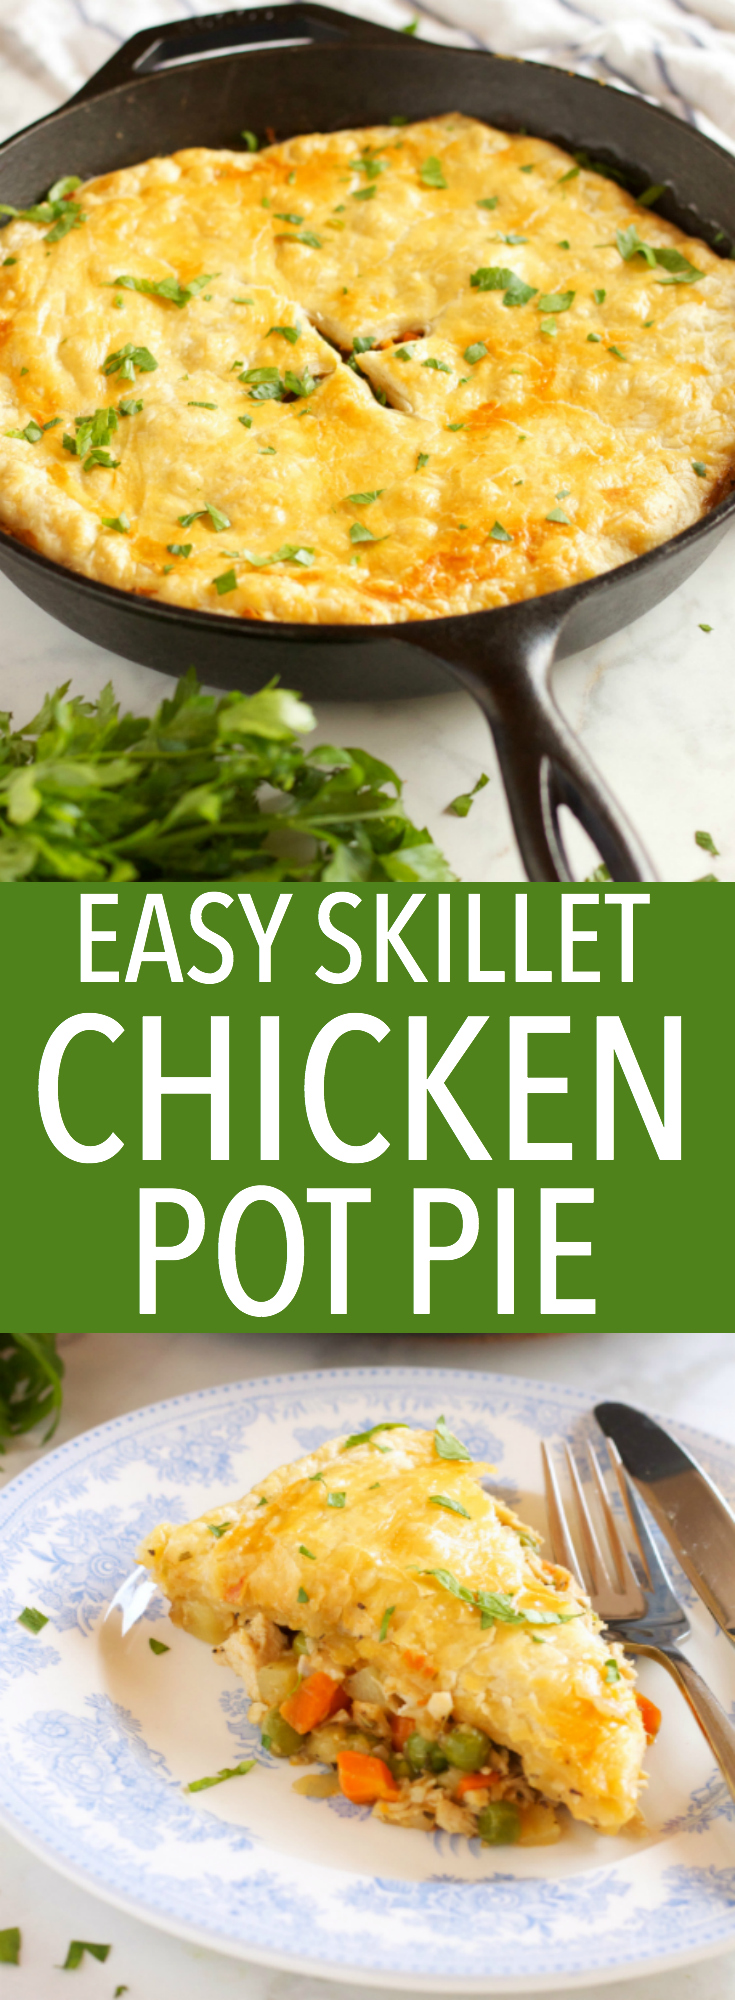 This Easy Skillet Chicken Pot Pie is the perfect comfort food for a weeknight family meal made from simple ingredients in just over 30 minutes! Recipe from thebusybaker.ca #comfortfood #easychickenrecipe via @busybakerblog